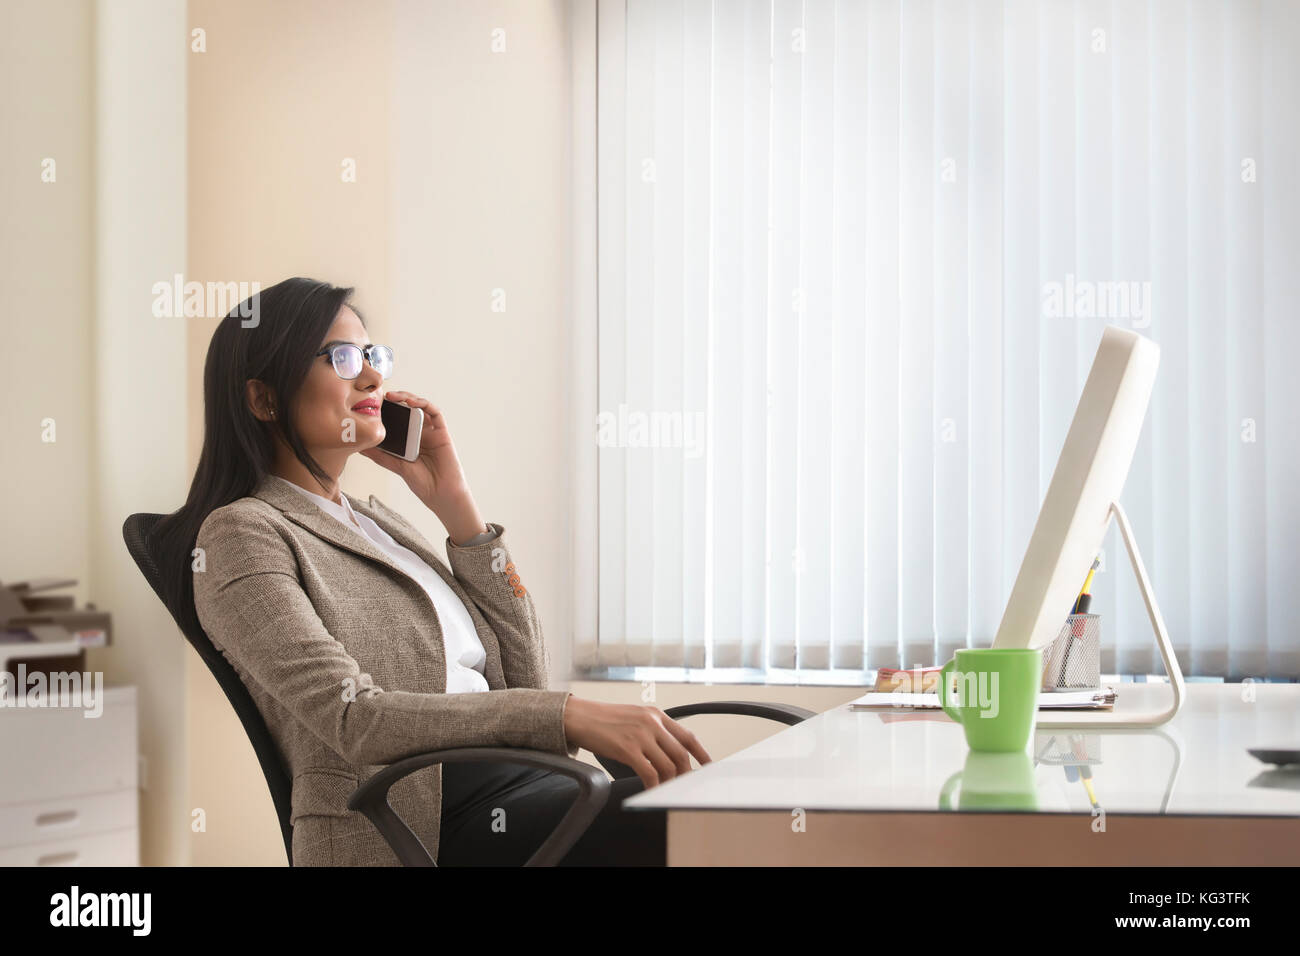 Businesswoman talking on mobile phone in office Stock Photo